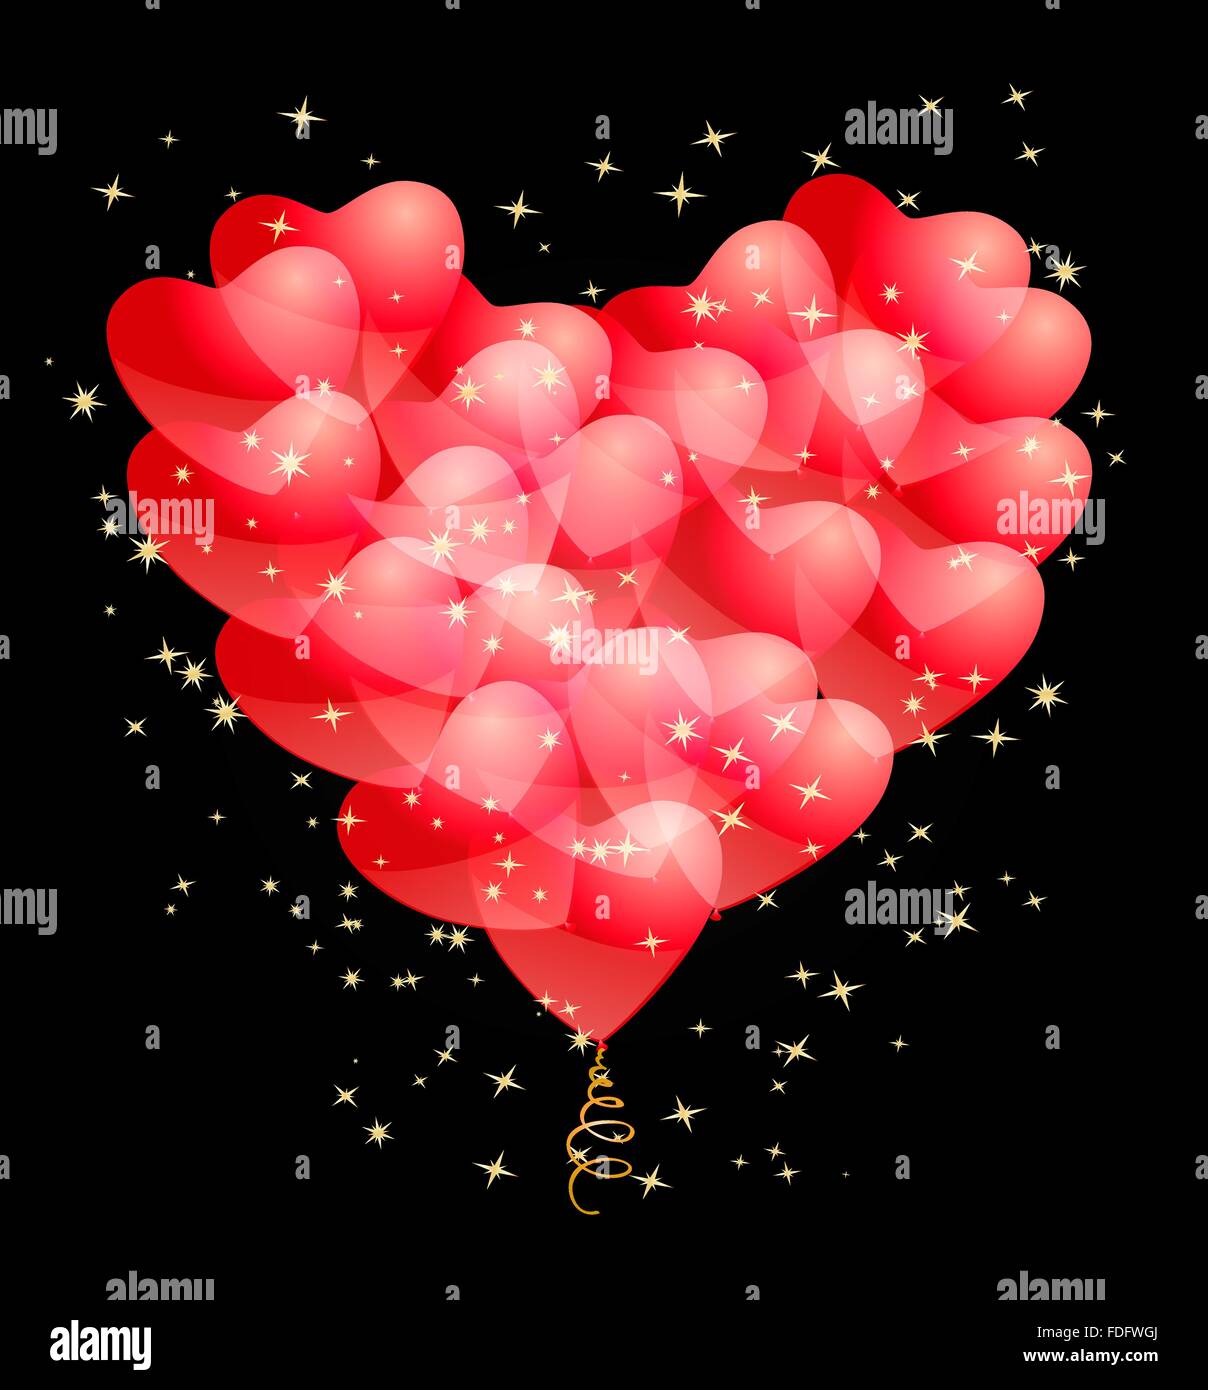 red balloons and stars making a heart shape. abstract vector design template on love, romance theme. Stock Vector